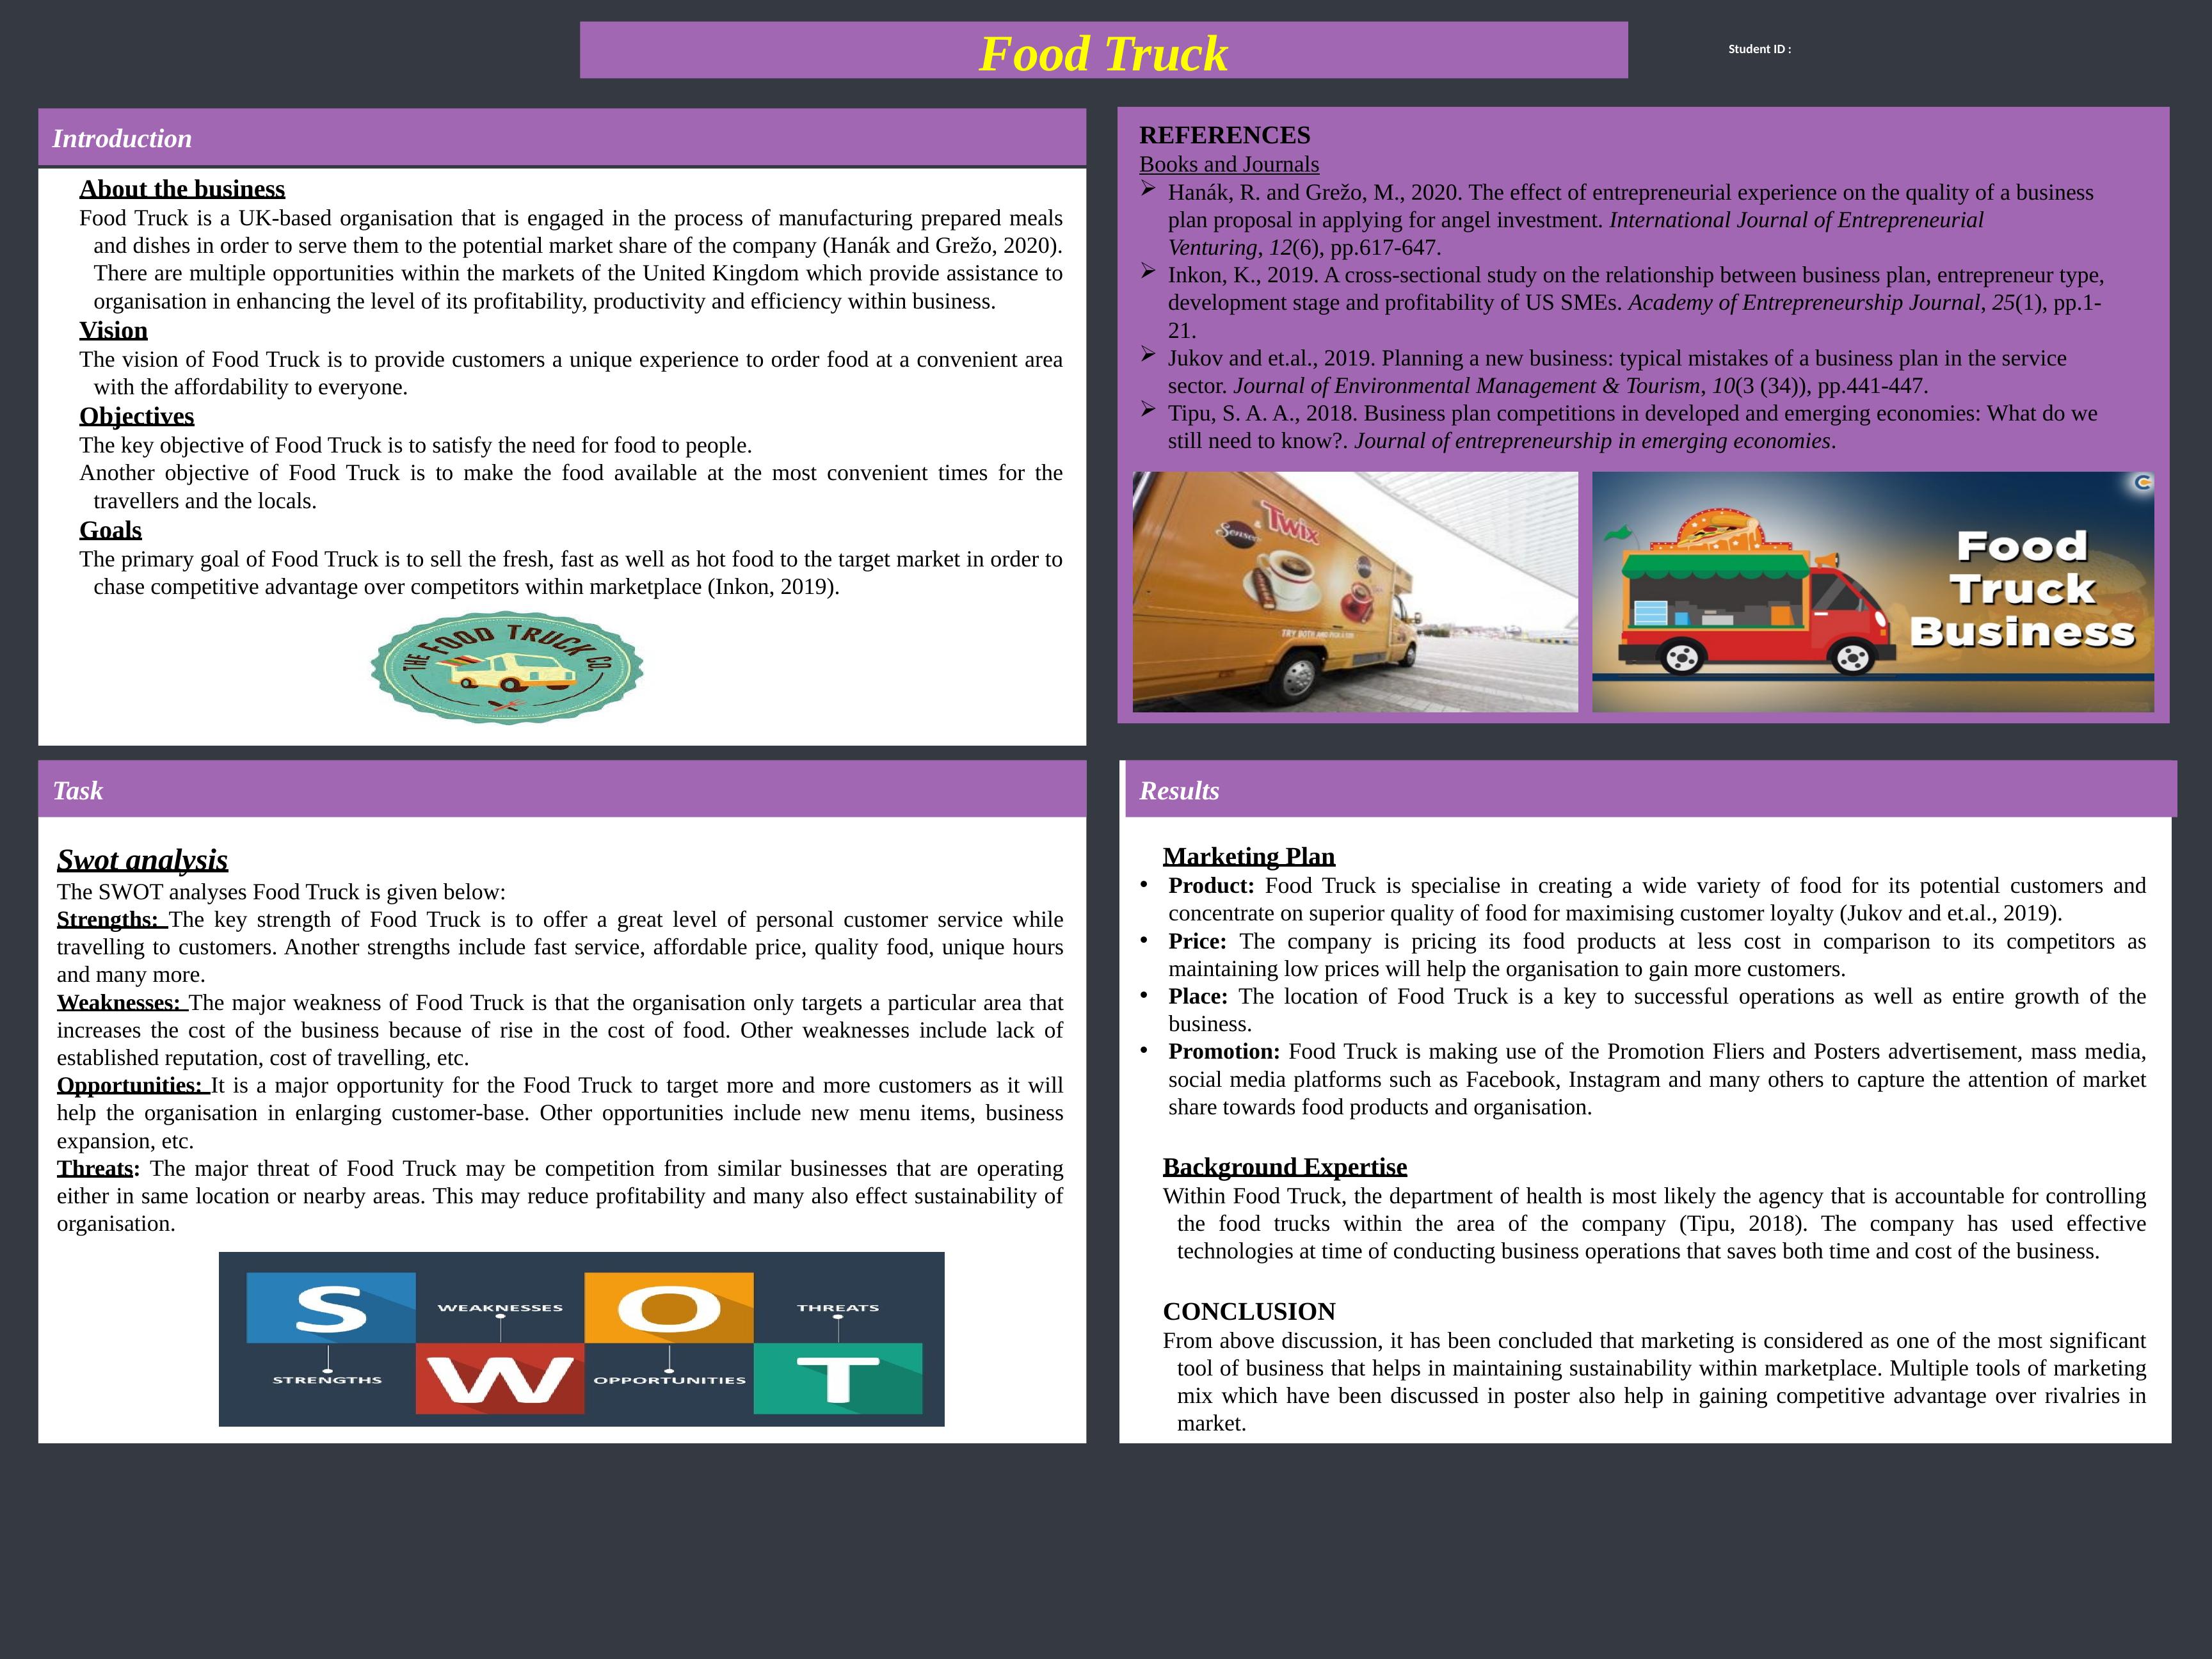 Food Truck Poster: Marketing Plan, SWOT Analysis, Objectives, and Background Expertise_1